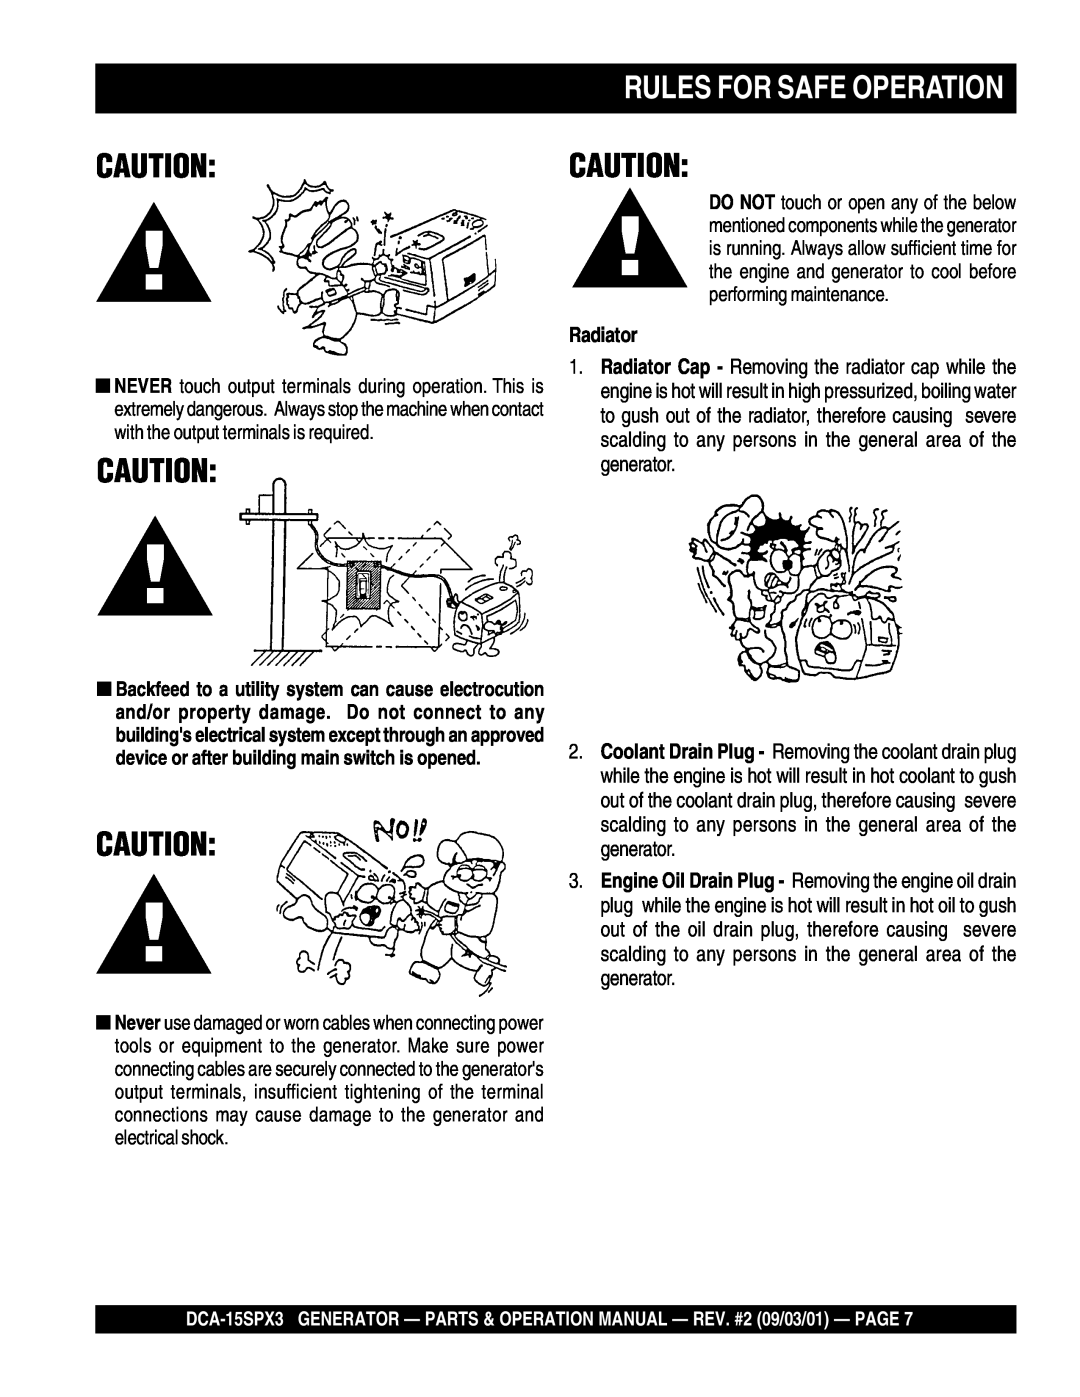 Multiquip DCA-15SPX3 operation manual Rules For Safe Operation, Caution:Caution 